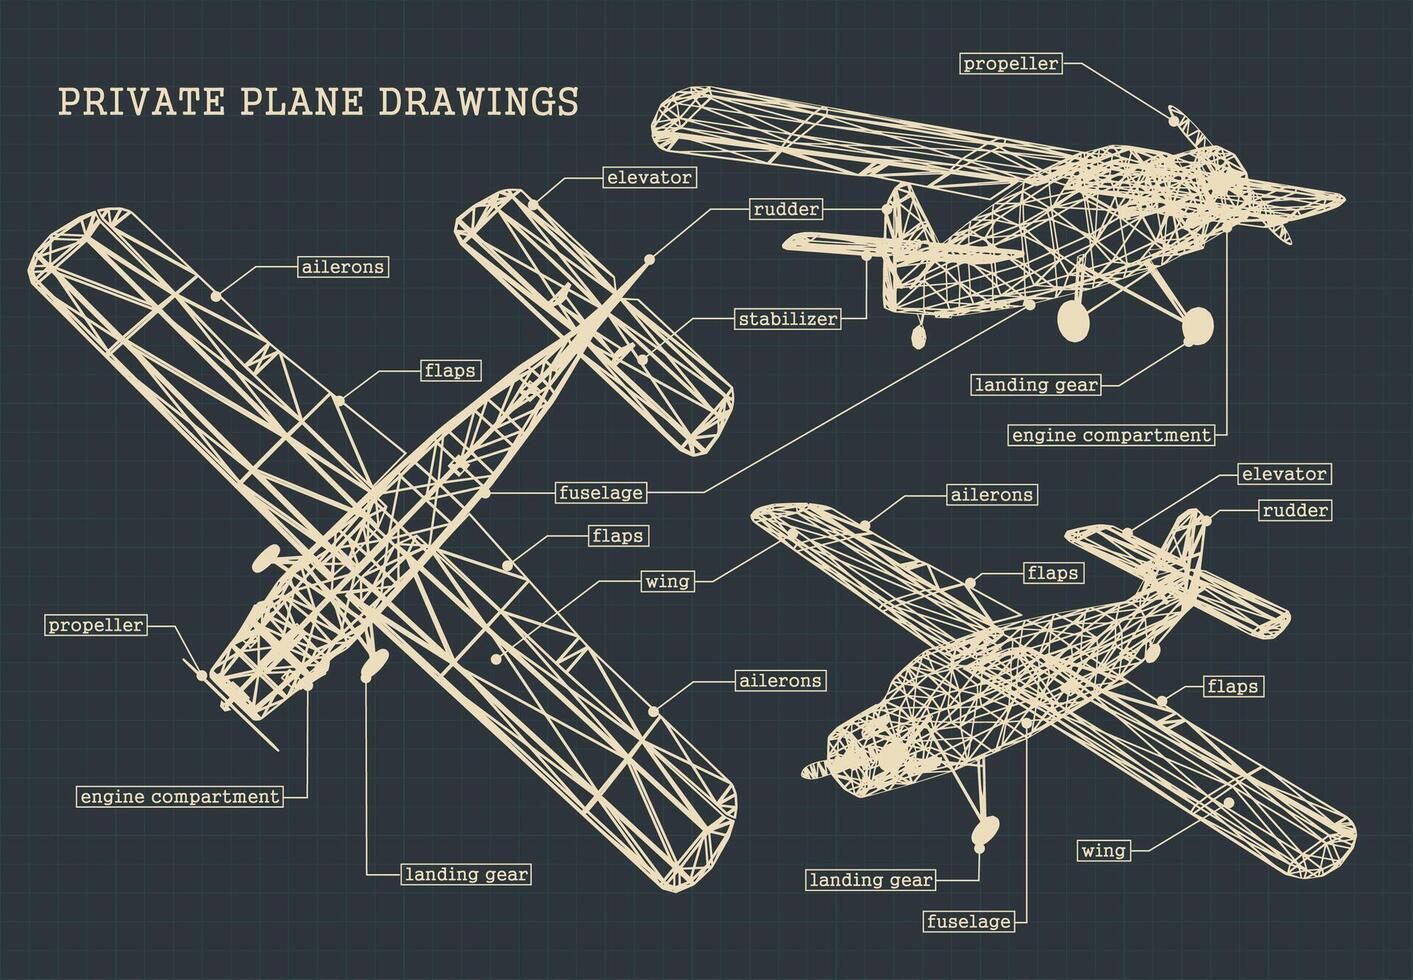 Light private plane drawings vector